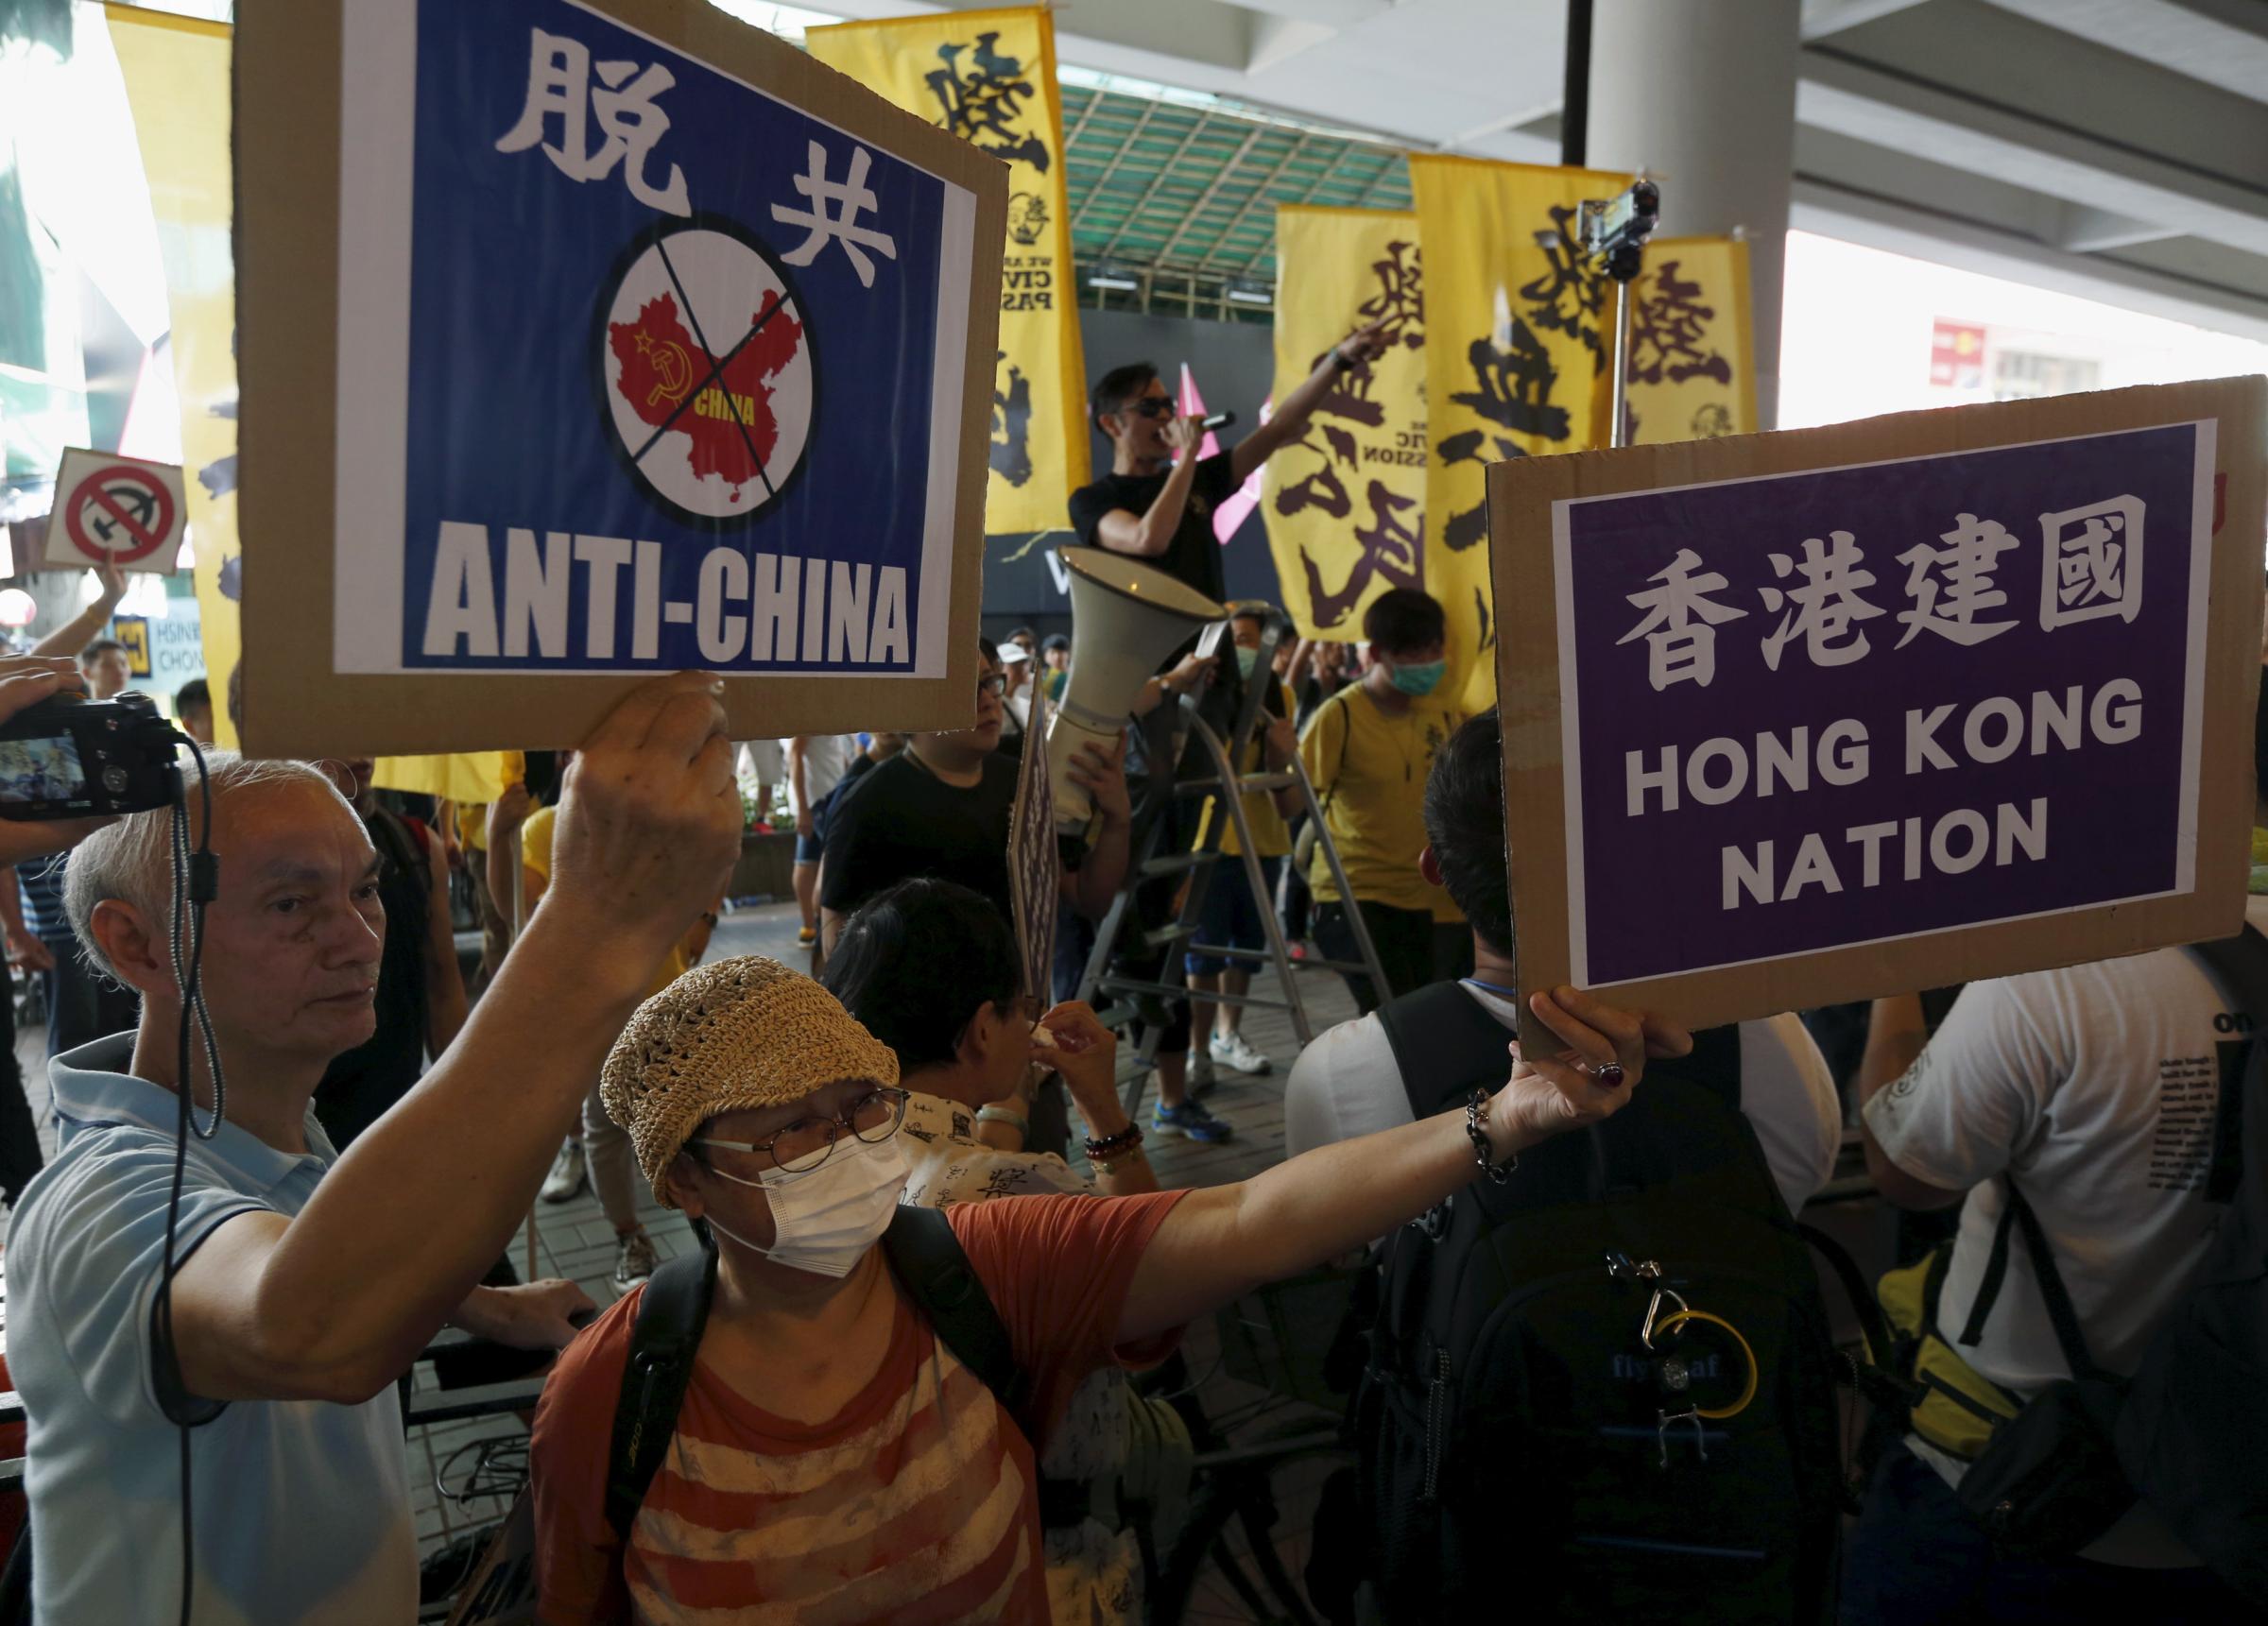 Protesters hold up placards as others shout against pro-China supporters (not in picture) during a demonstration in Hong Kong